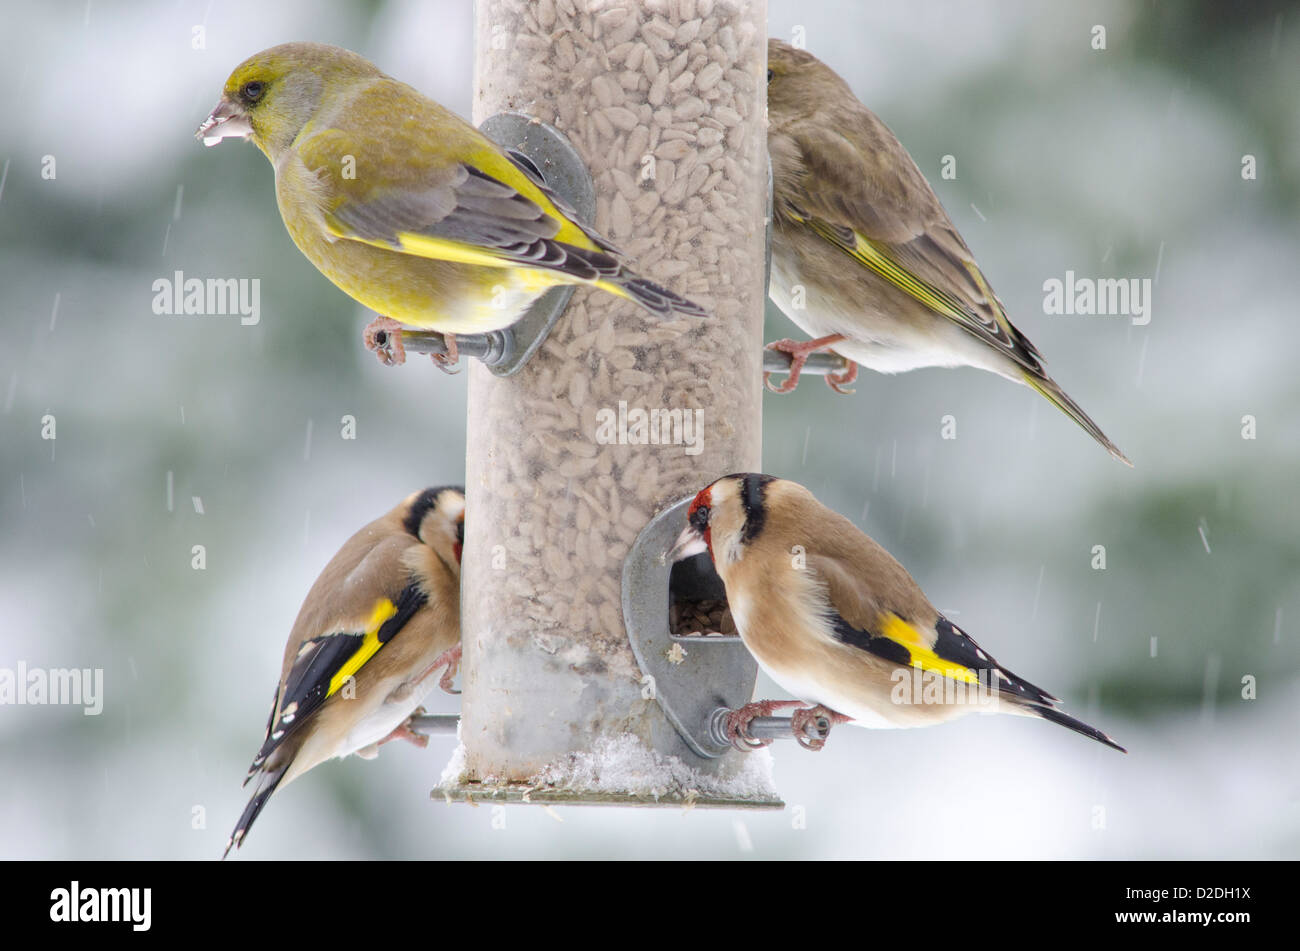 European Goldfinch [Carduelis carduelis] and Greenfinch [Carduelis chloris] on bird feeder filled with sunflower hearts. Snowing Stock Photo